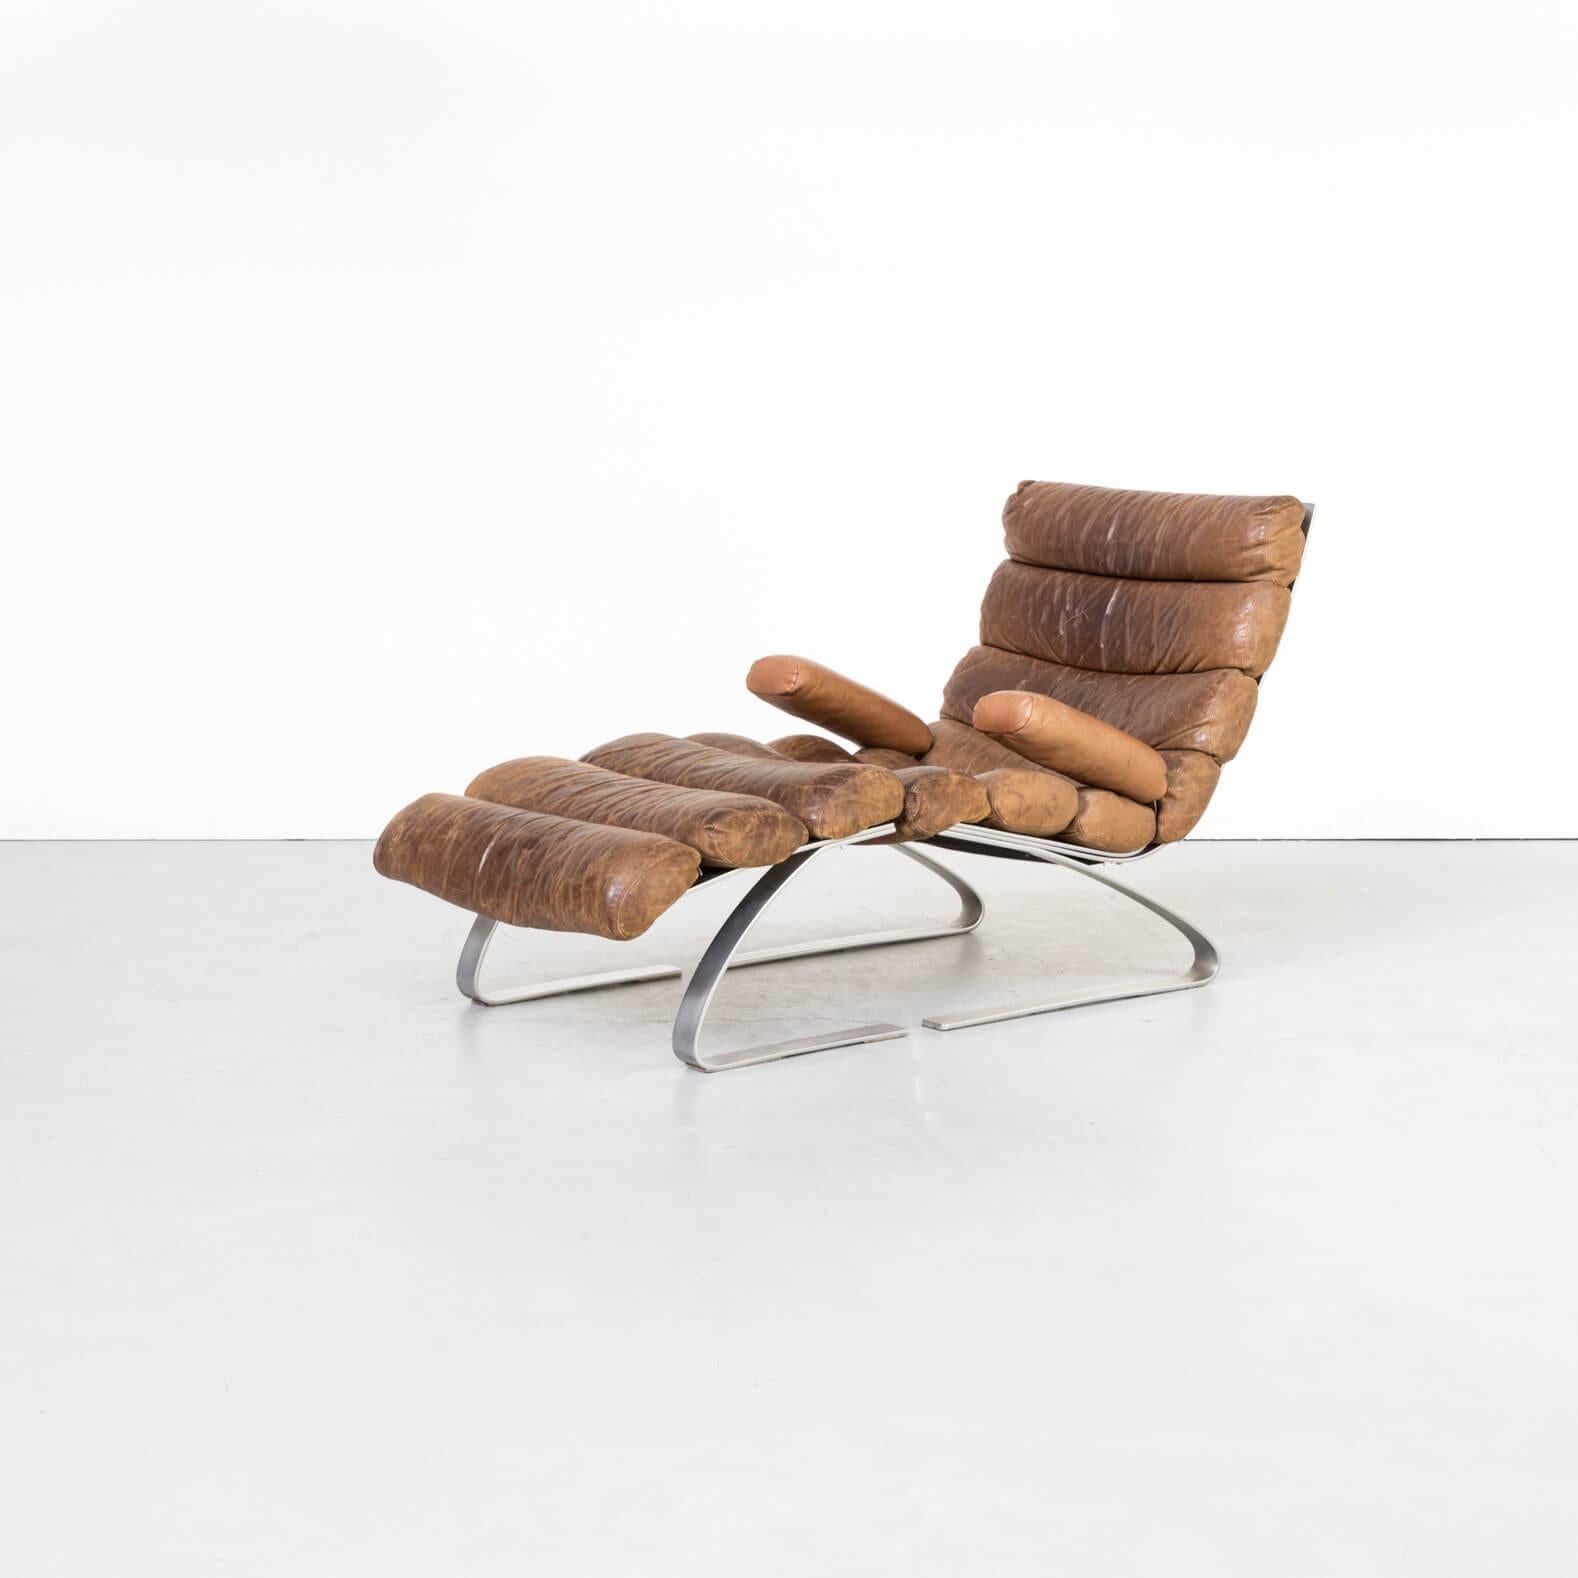 This sinus leather lounge chair was designed by Reinhold Adolf and Hans-Jürgen Schräpfer in 1976 for COR, Germany. The chair is part of the sinus/swing collection, a series characterized by swinging spring steel rockers with upholstery as unusual as